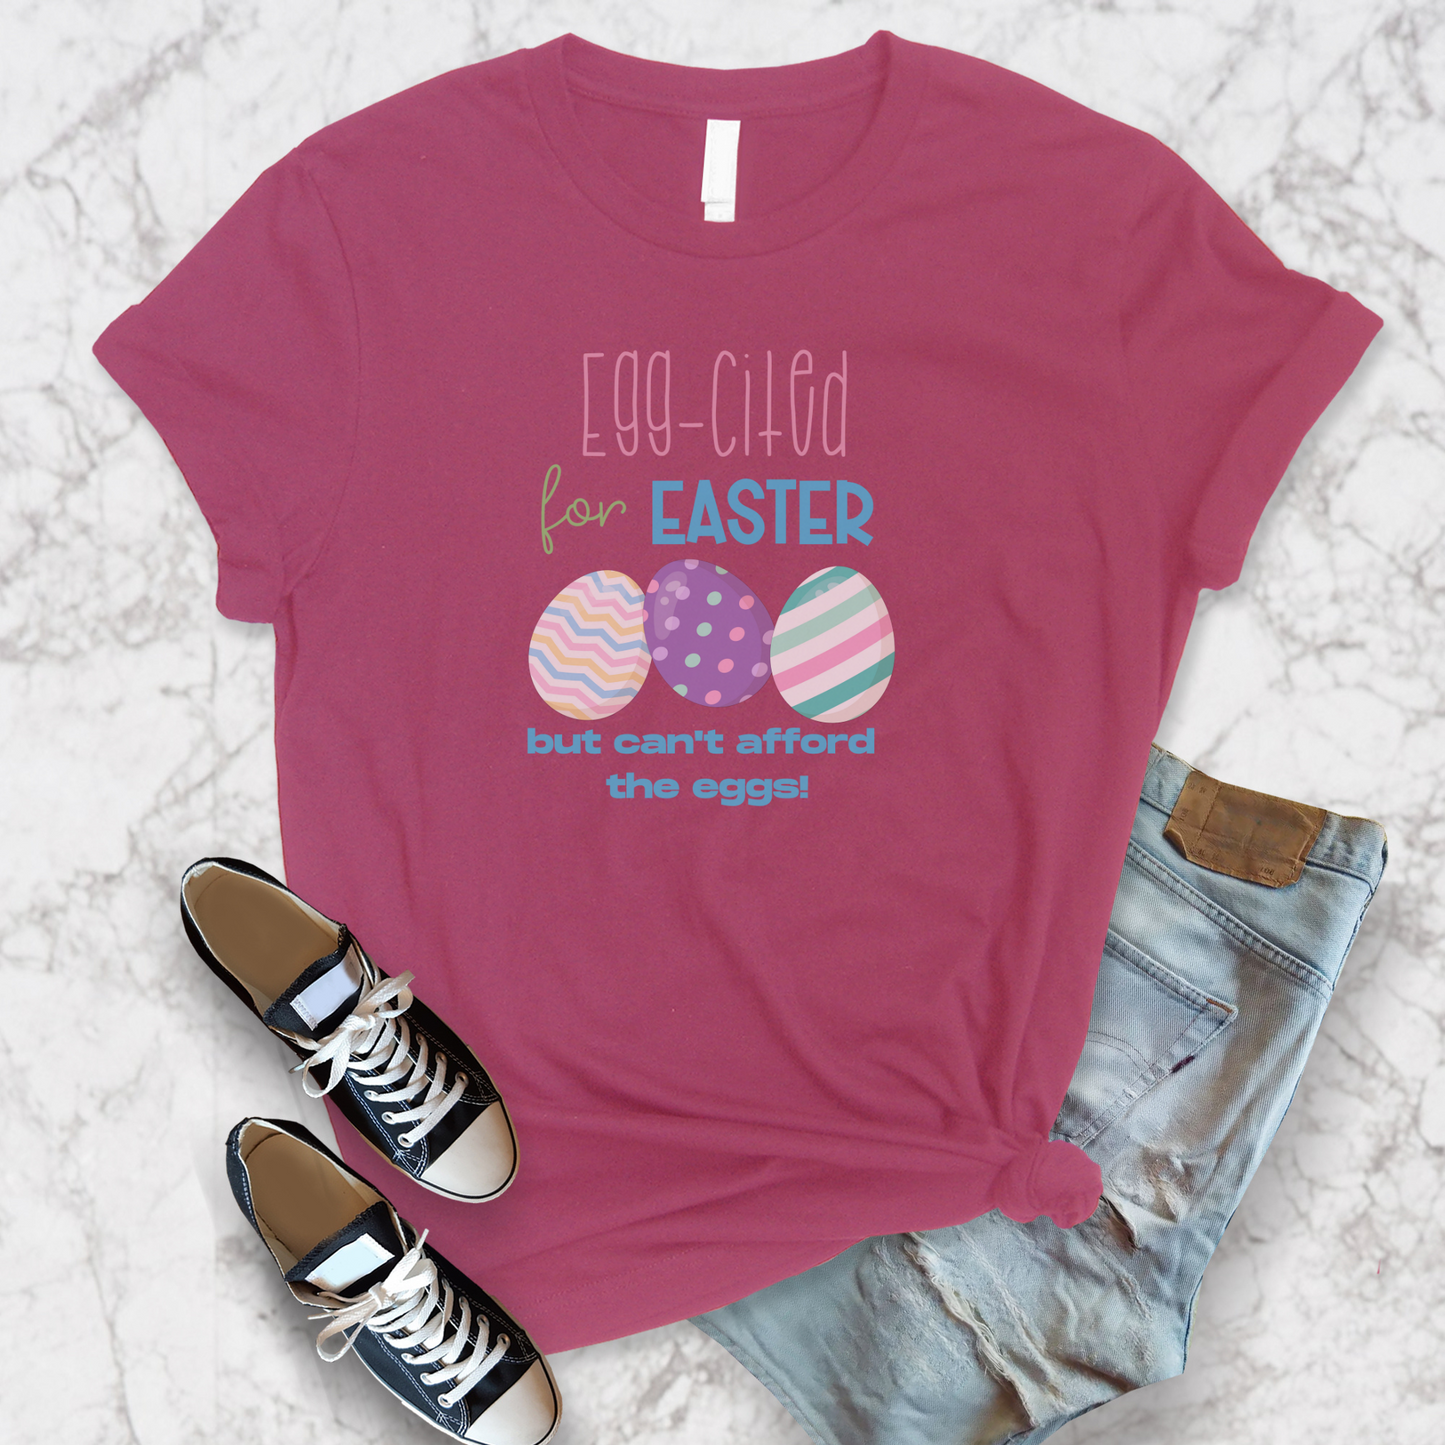 Egg-Cited for Easter Funny Expensive Eggs Unisex Jersey Short Sleeve Tee Small-3XL